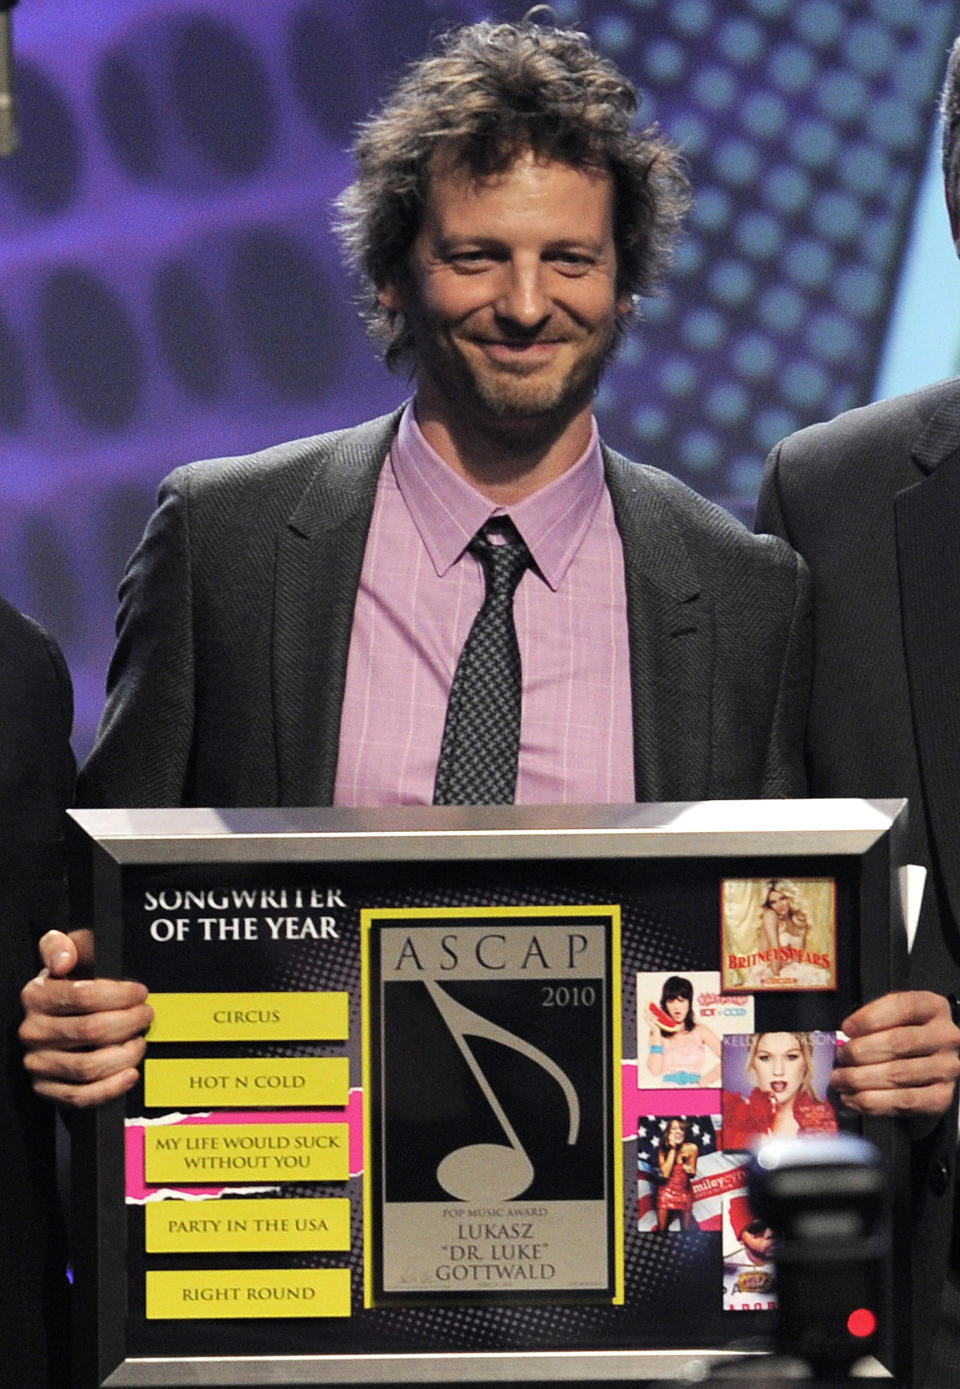 FILE - Lukasz "Dr. Luke" Gottwald accepts the Songwriter of the Year award at the 27th Annual ASCAP Pop Music Awards on April 21, 2010, in Los Angeles. The controversial music producer and hitmaker rose to the top of the Billboard charts with Doja Cat’s ubiquitous funk-pop jam “Say So,” along with Saweetie's anthemic bop “Tap In” and Juice WRLD's Top 5 pop smash “Wishing Well." He appeared as Tyson Trax on the Grammy ballot for Doja Cat's “Say So," which he produced and co-wrote. The hit tune is competing for record of the year, where he is contention as the song’s producer. (AP Photo/Chris Pizzello, File)